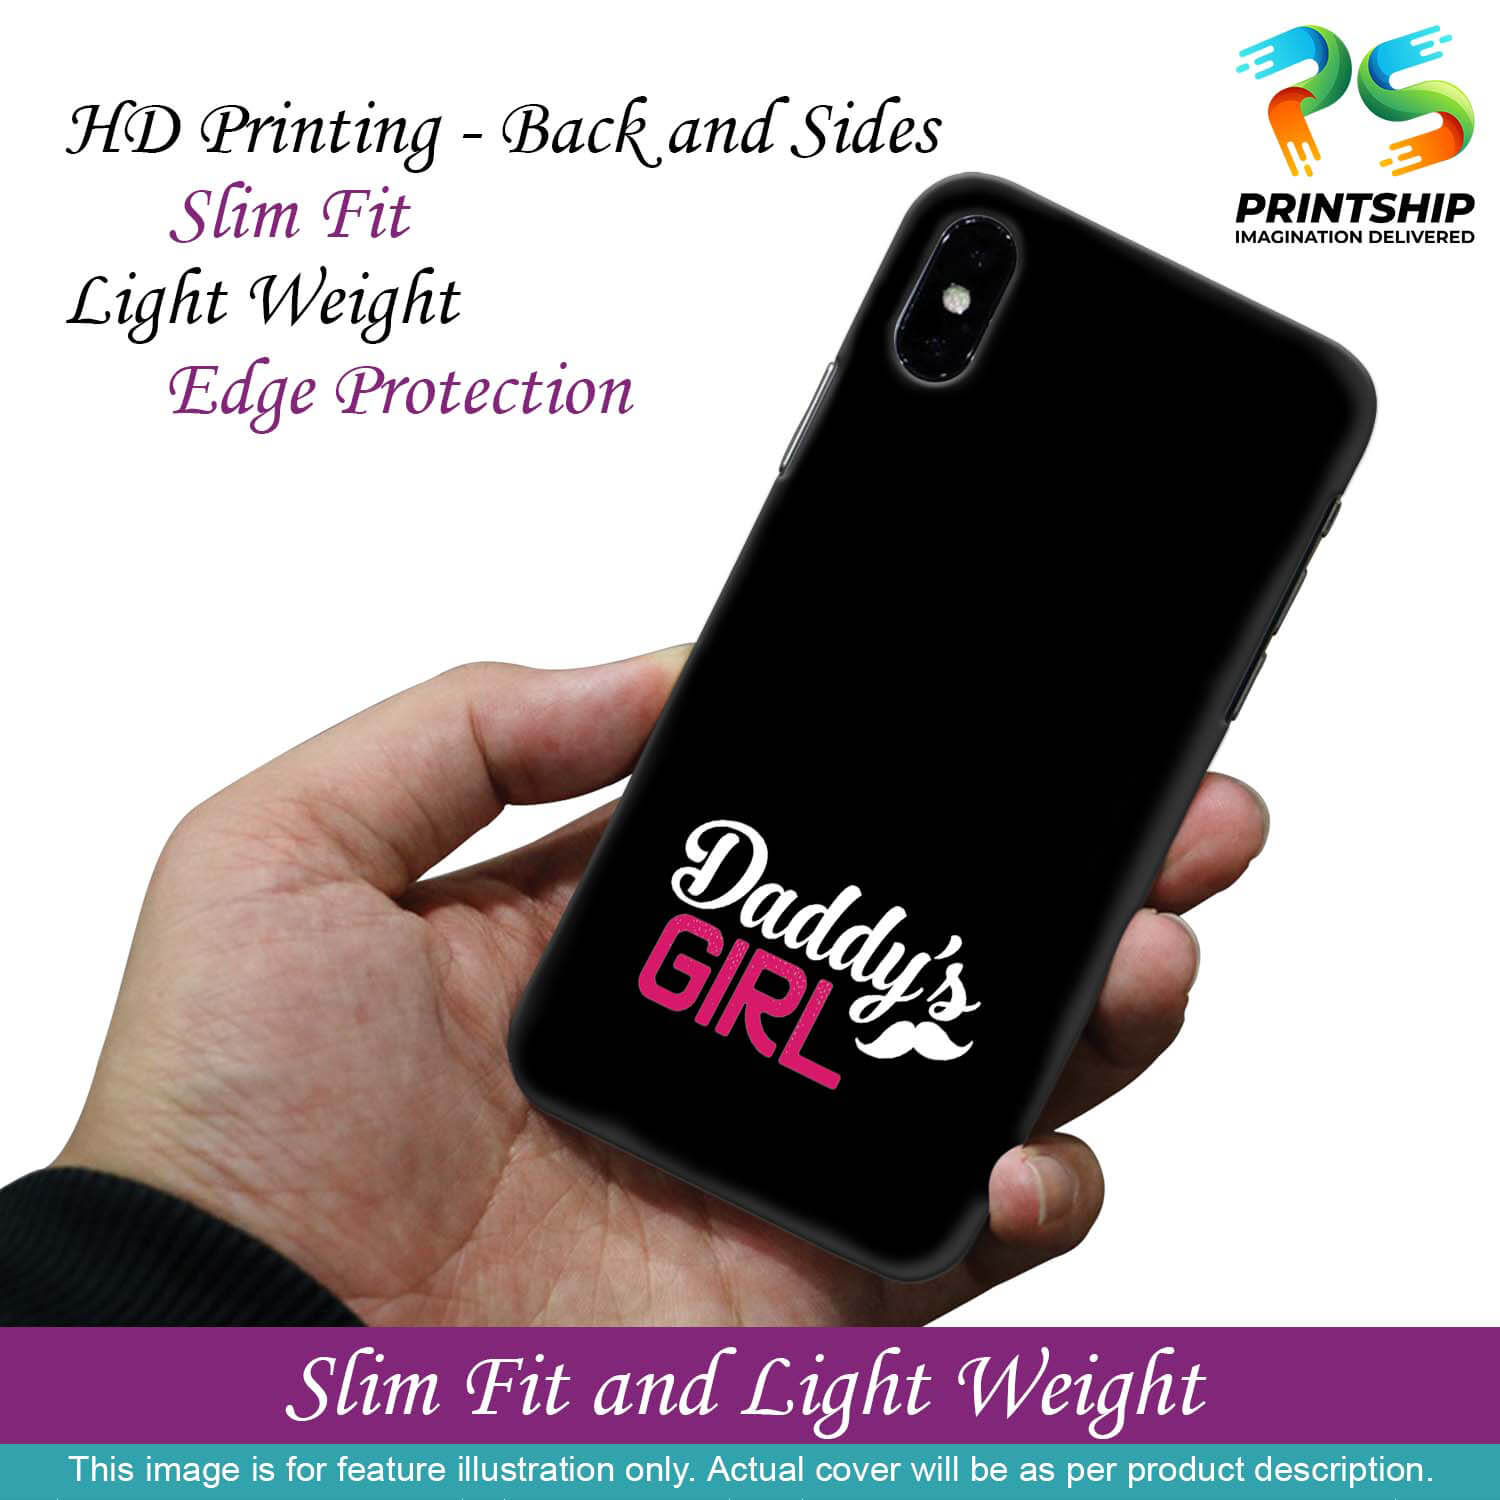 U0052-Daddy's Girl Back Cover for Realme Q3 Pro 5G